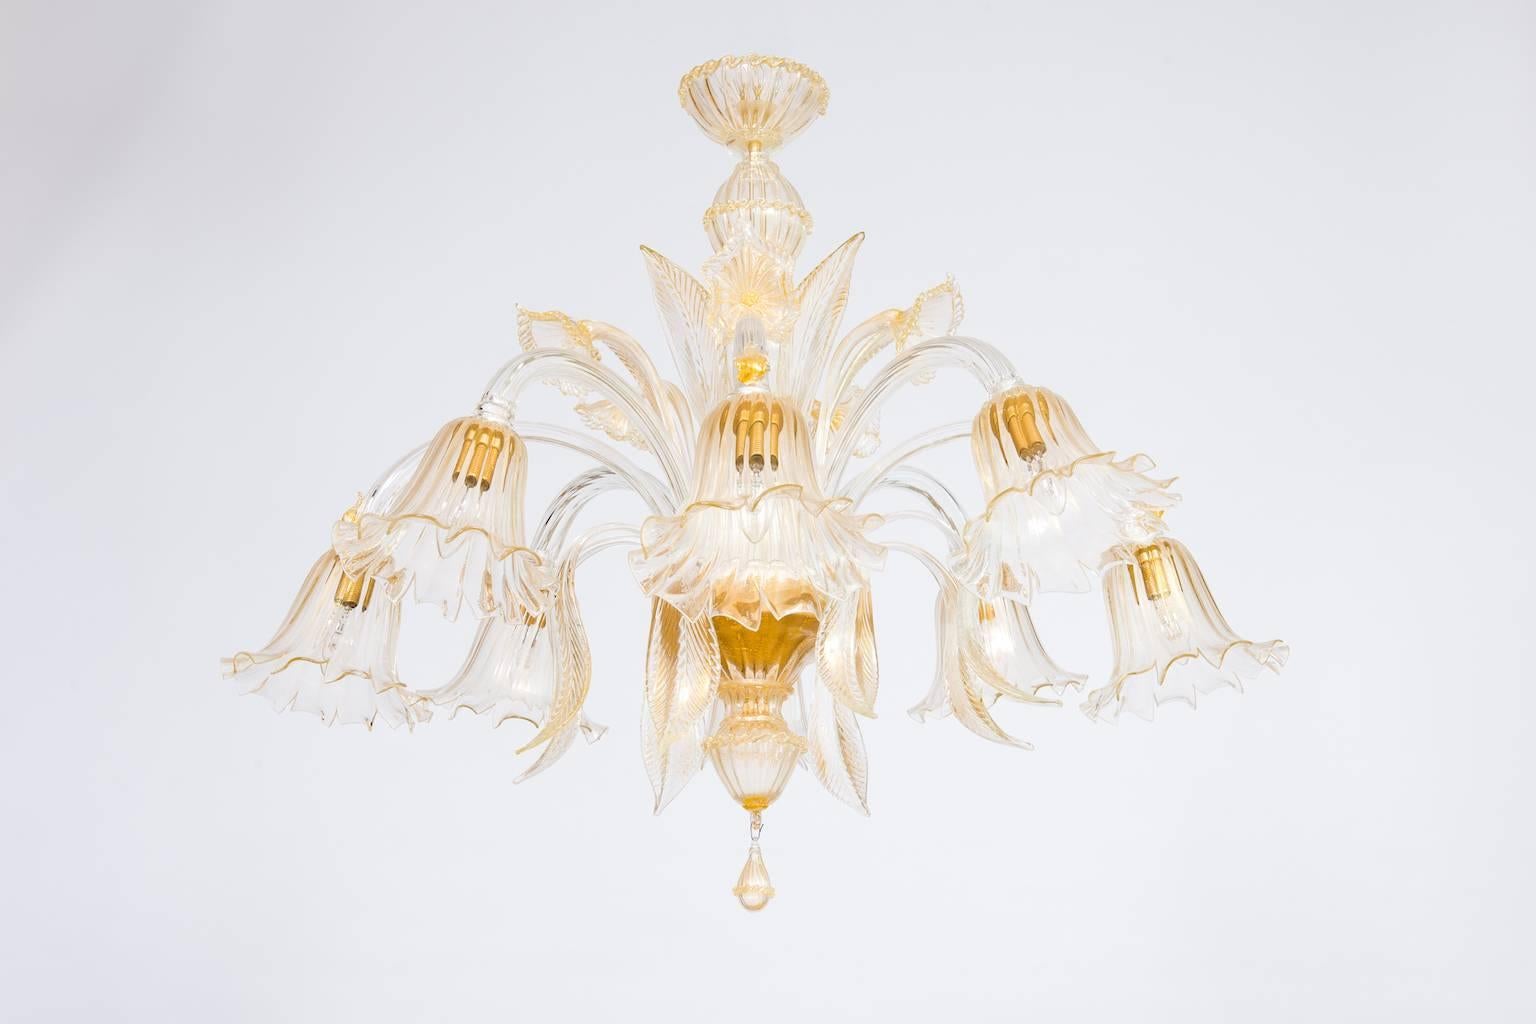 Elegant Italian chandelier in Murano glass transparent and 24-karat gold, composed of very detailed parts that represented flower and leaves high and low. All parts were made and realized in the Murano Island, circa 1990s. The chandelier is in very